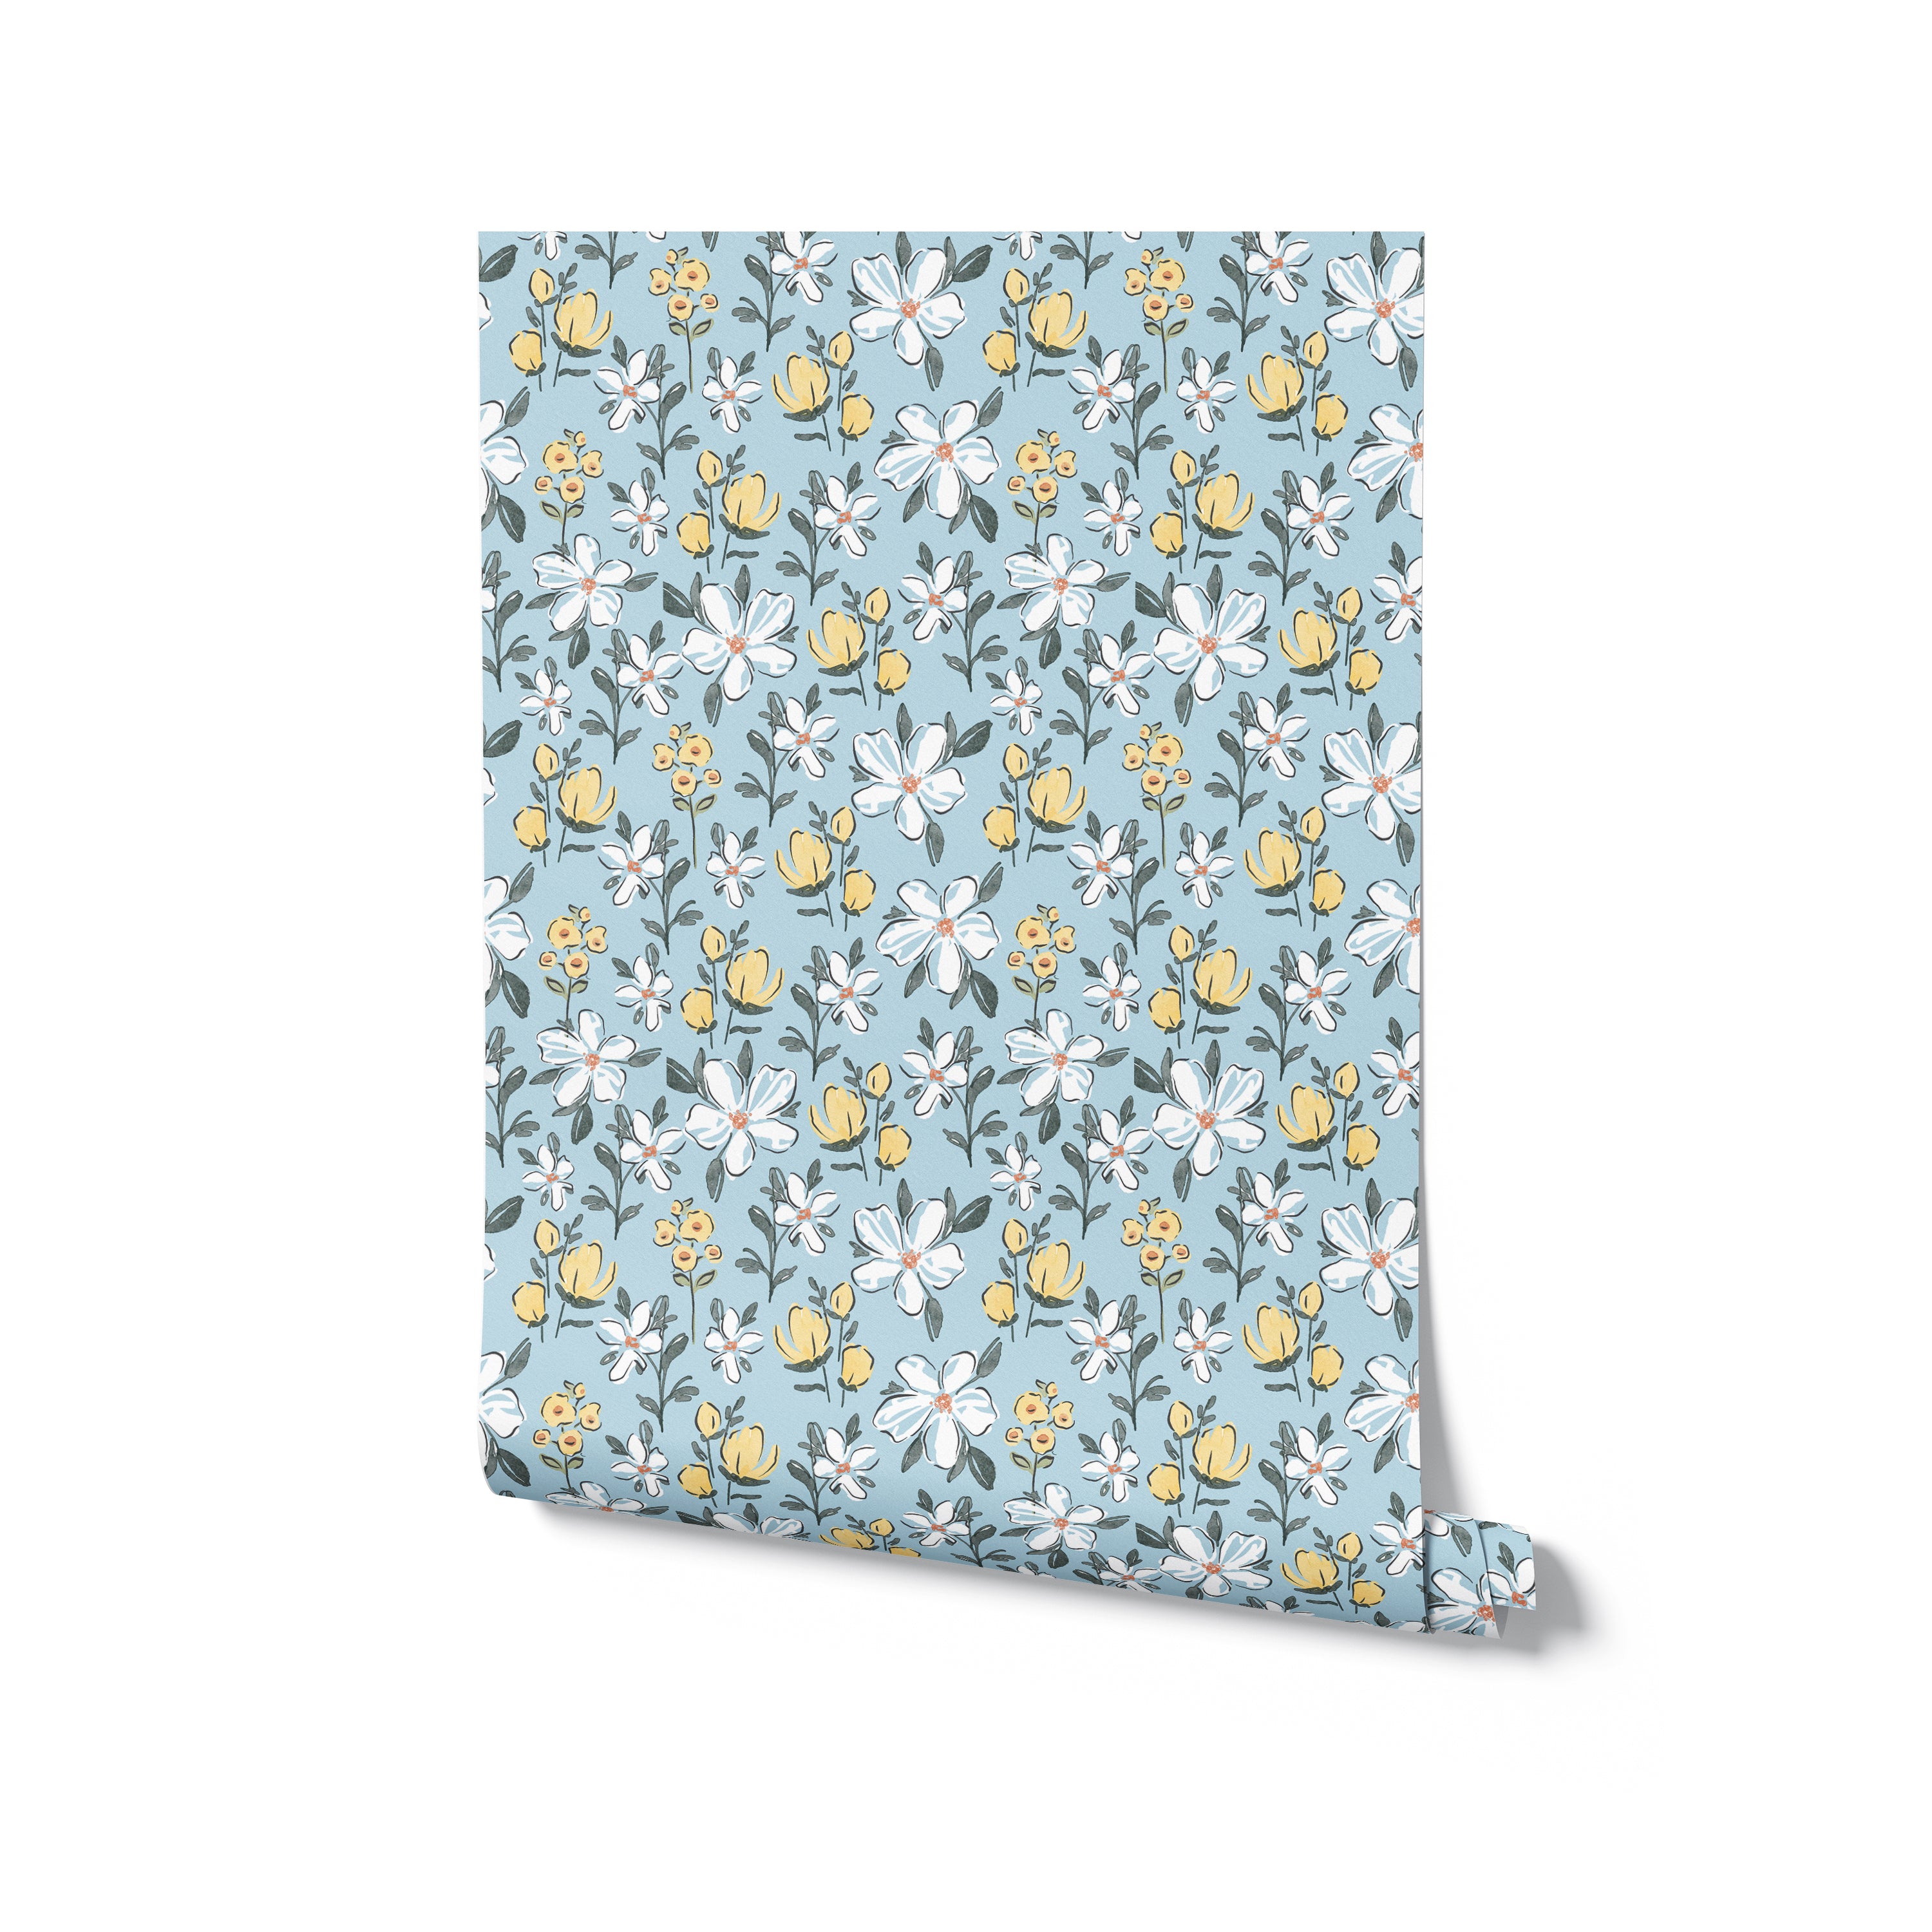 An image of the Sweet Nursery Wallpaper rolled out to show the charming and colorful floral pattern, ideal for adding a bright and joyful touch to any nursery or play area.